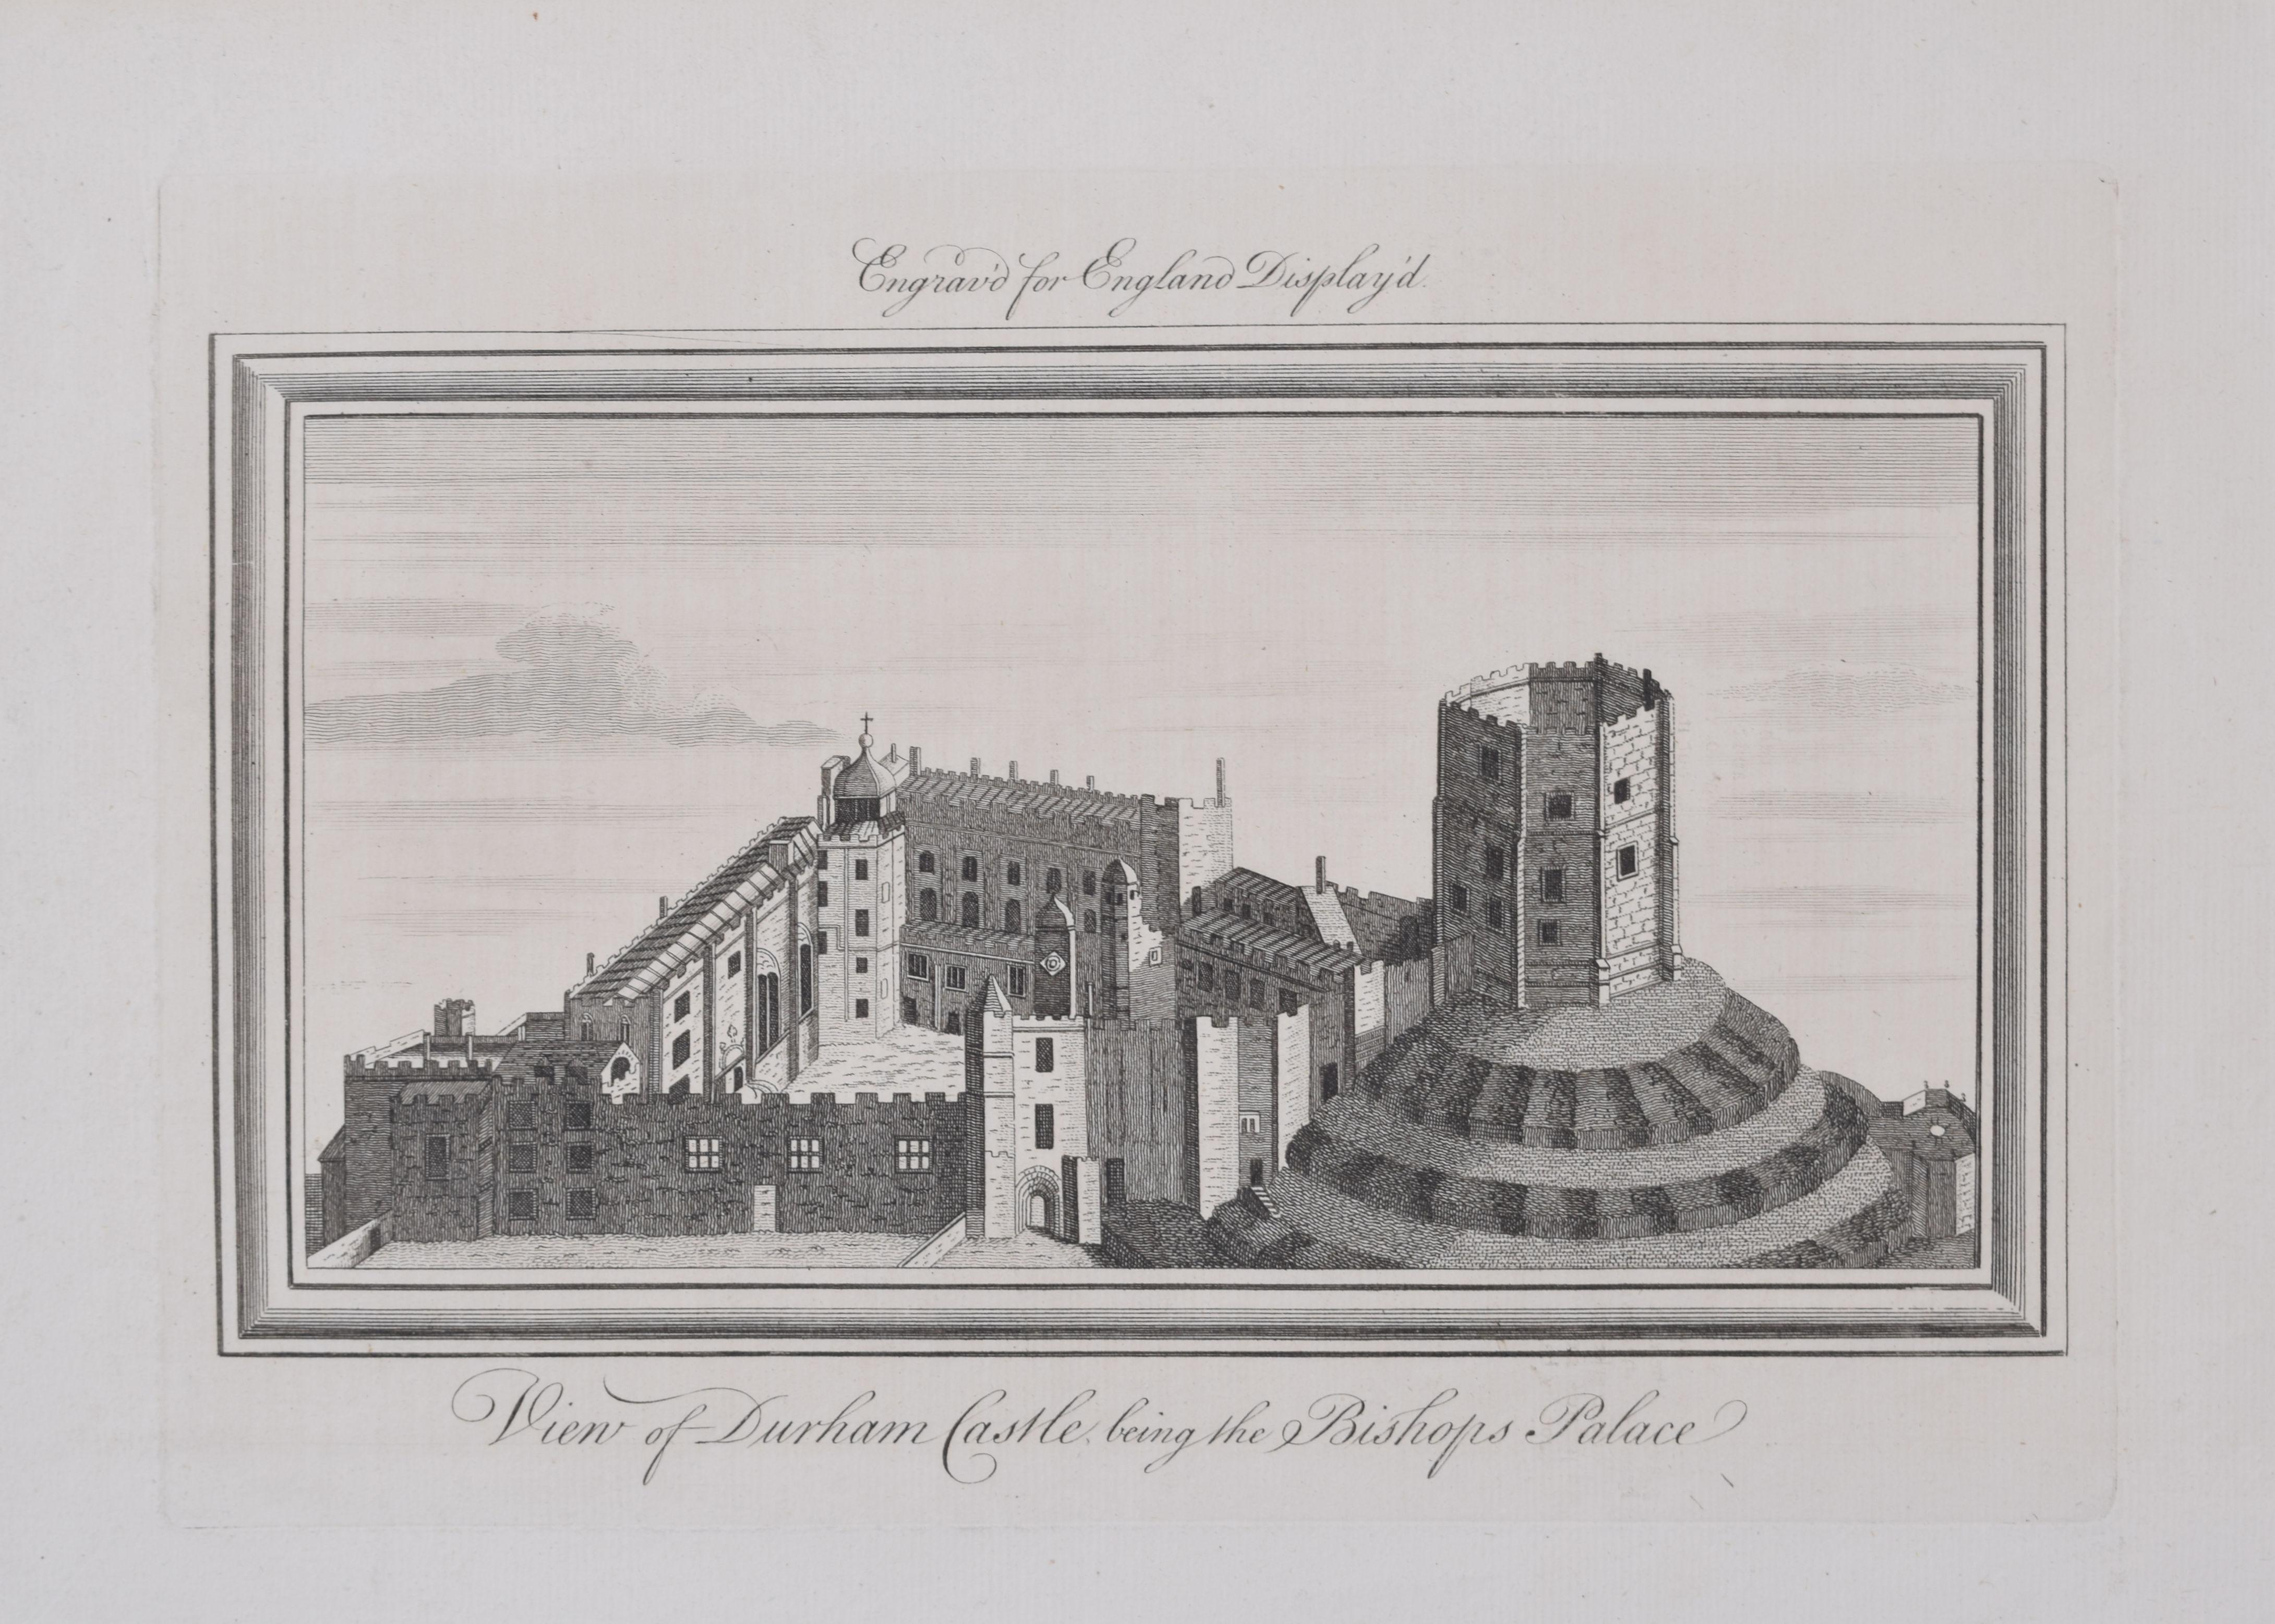 Castle (University College, Durham) engraving after Samuel and Nathaniel Buck